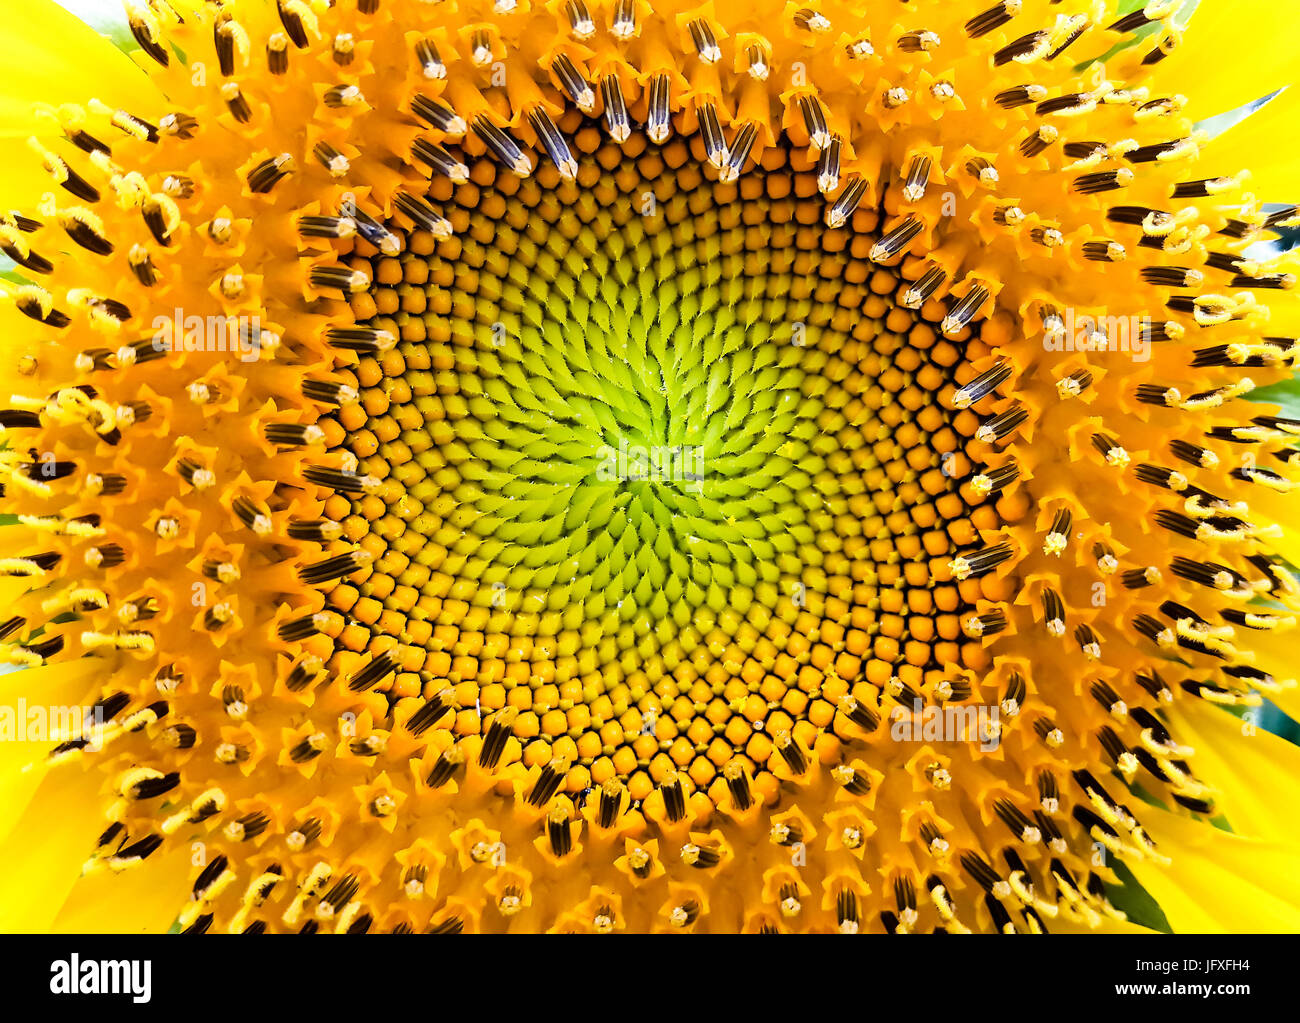 Close up at the center of sunflower showing complex fibonacci sequences. Stock Photo